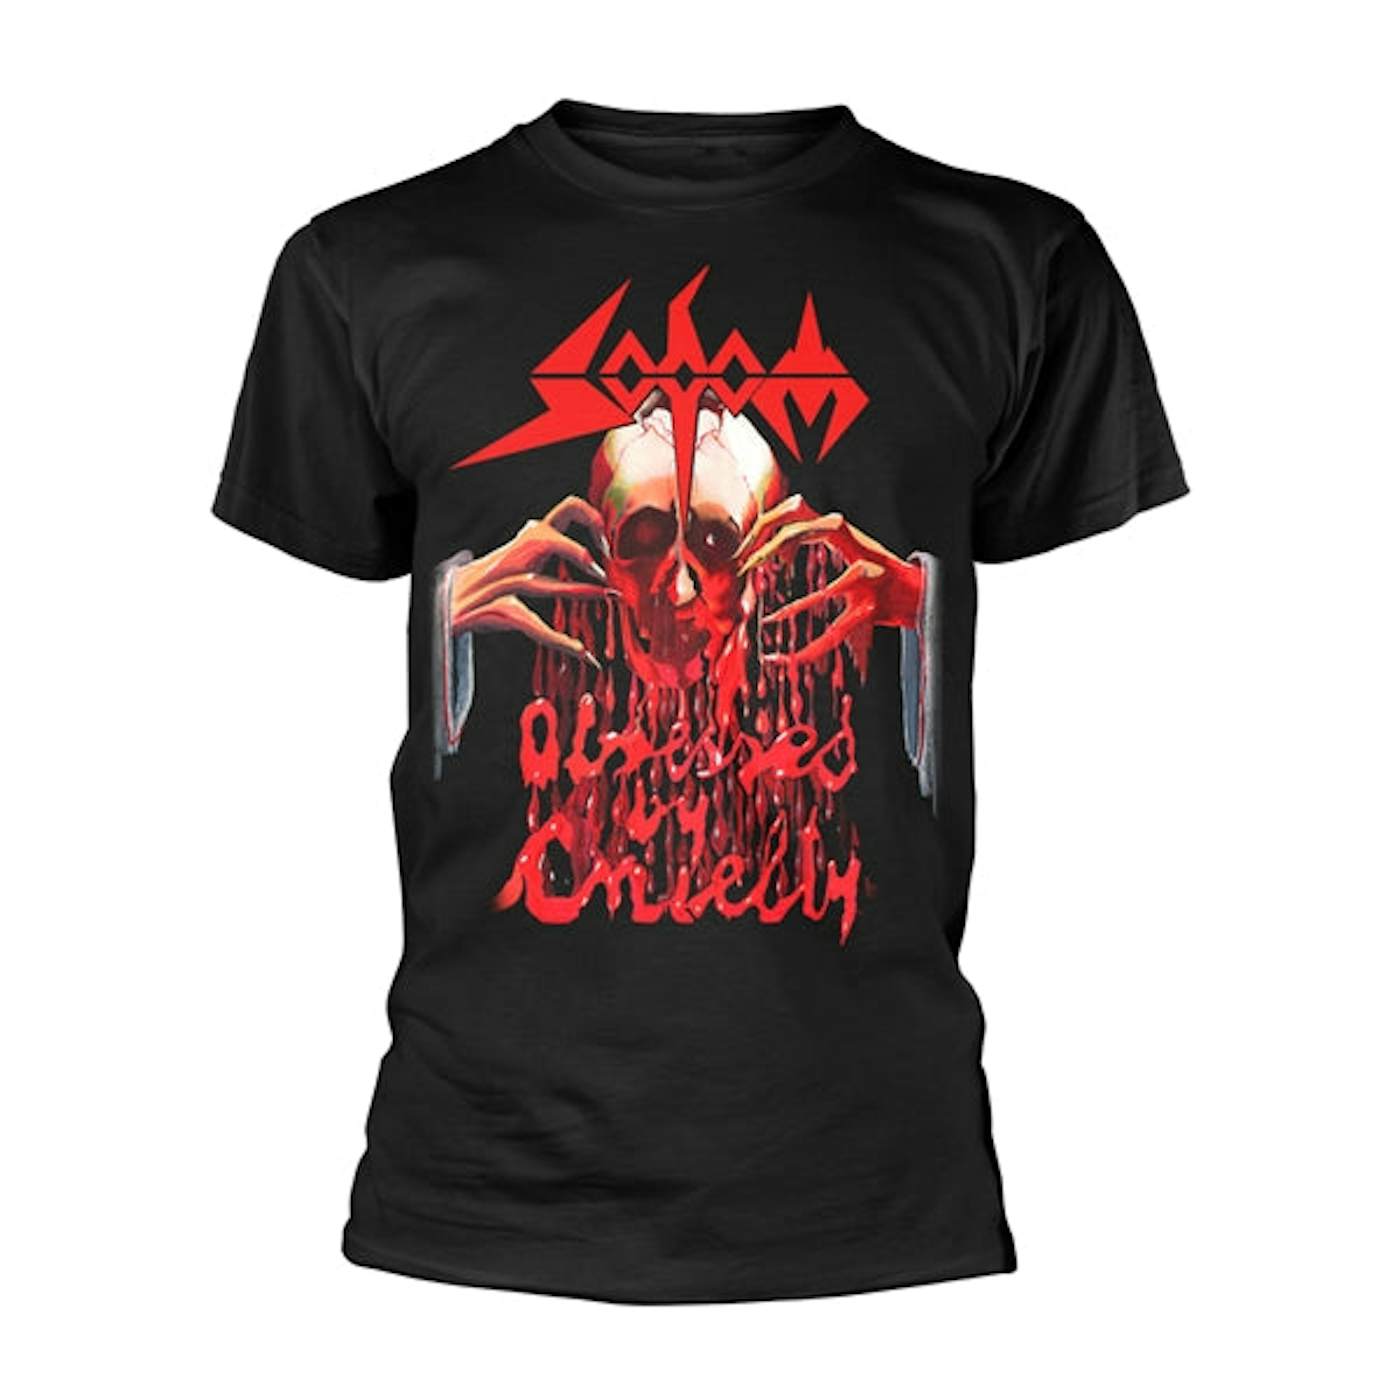 Sodom T-Shirt - Obsessed By Cruelty